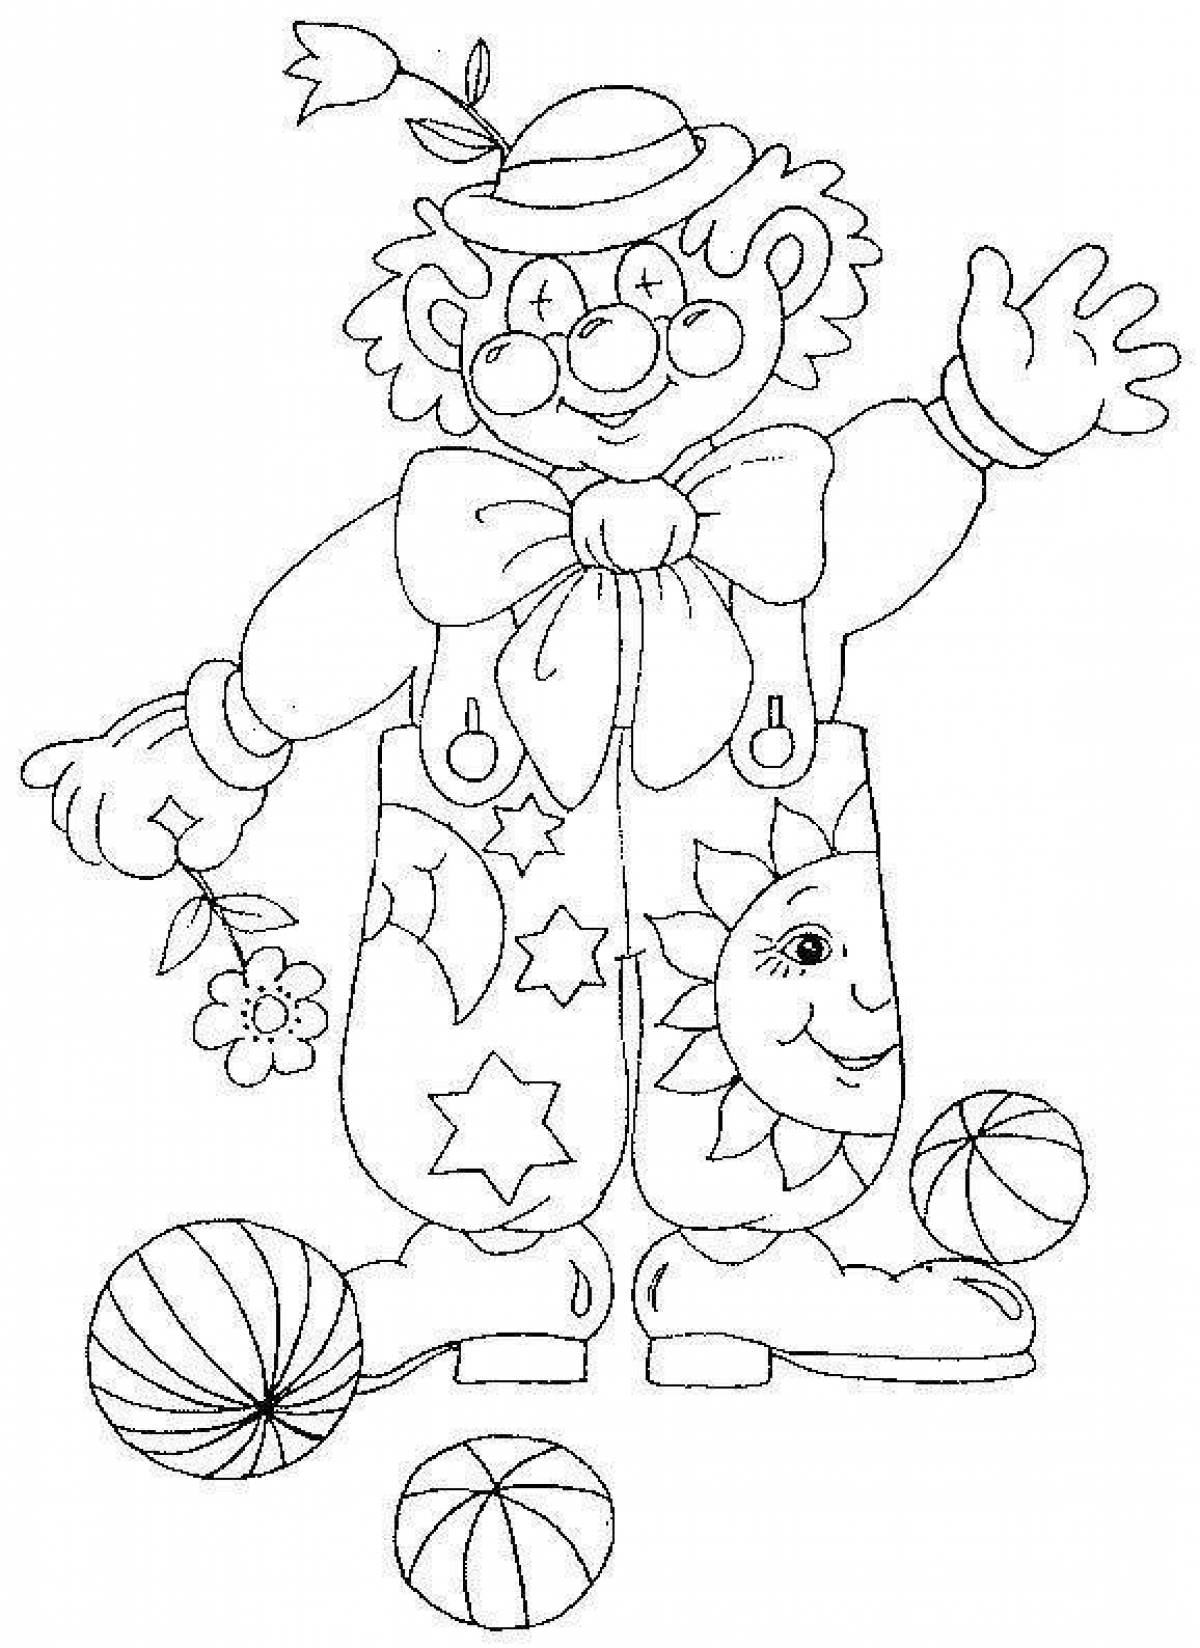 Fancy coloring funny clown